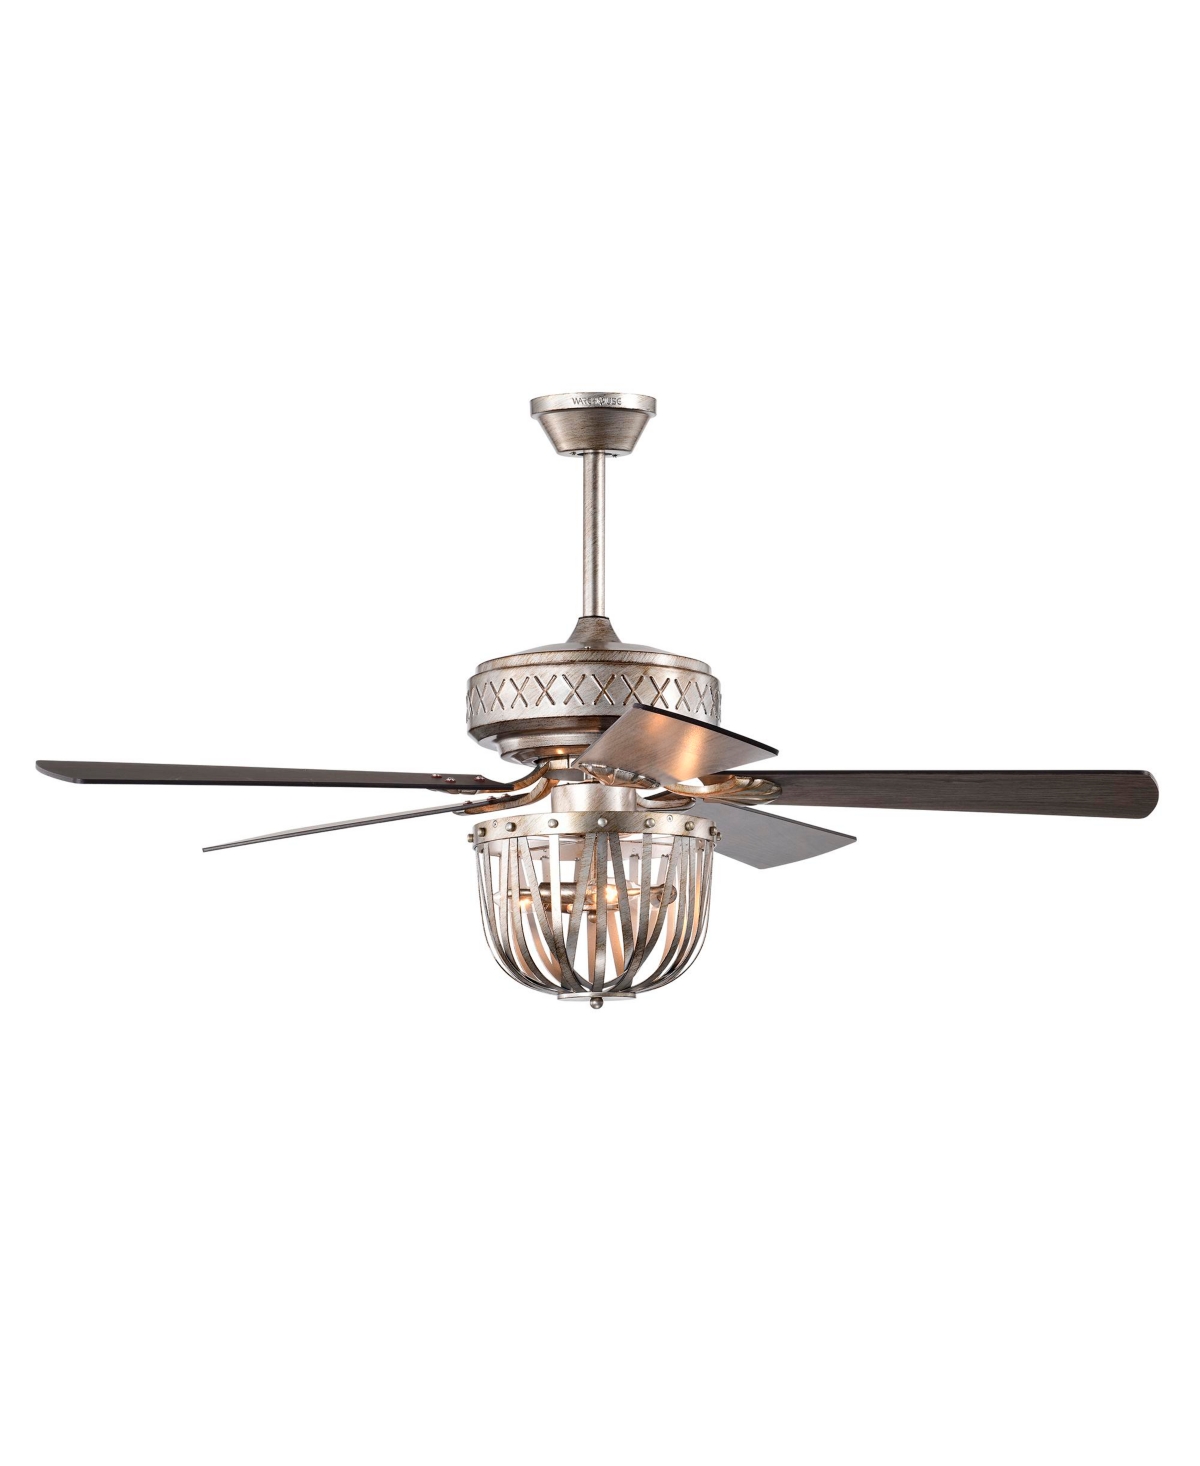 Home Accessories Emani 52" 3-light Indoor Ceiling Fan With Light Kit And Remote In Antique Silver